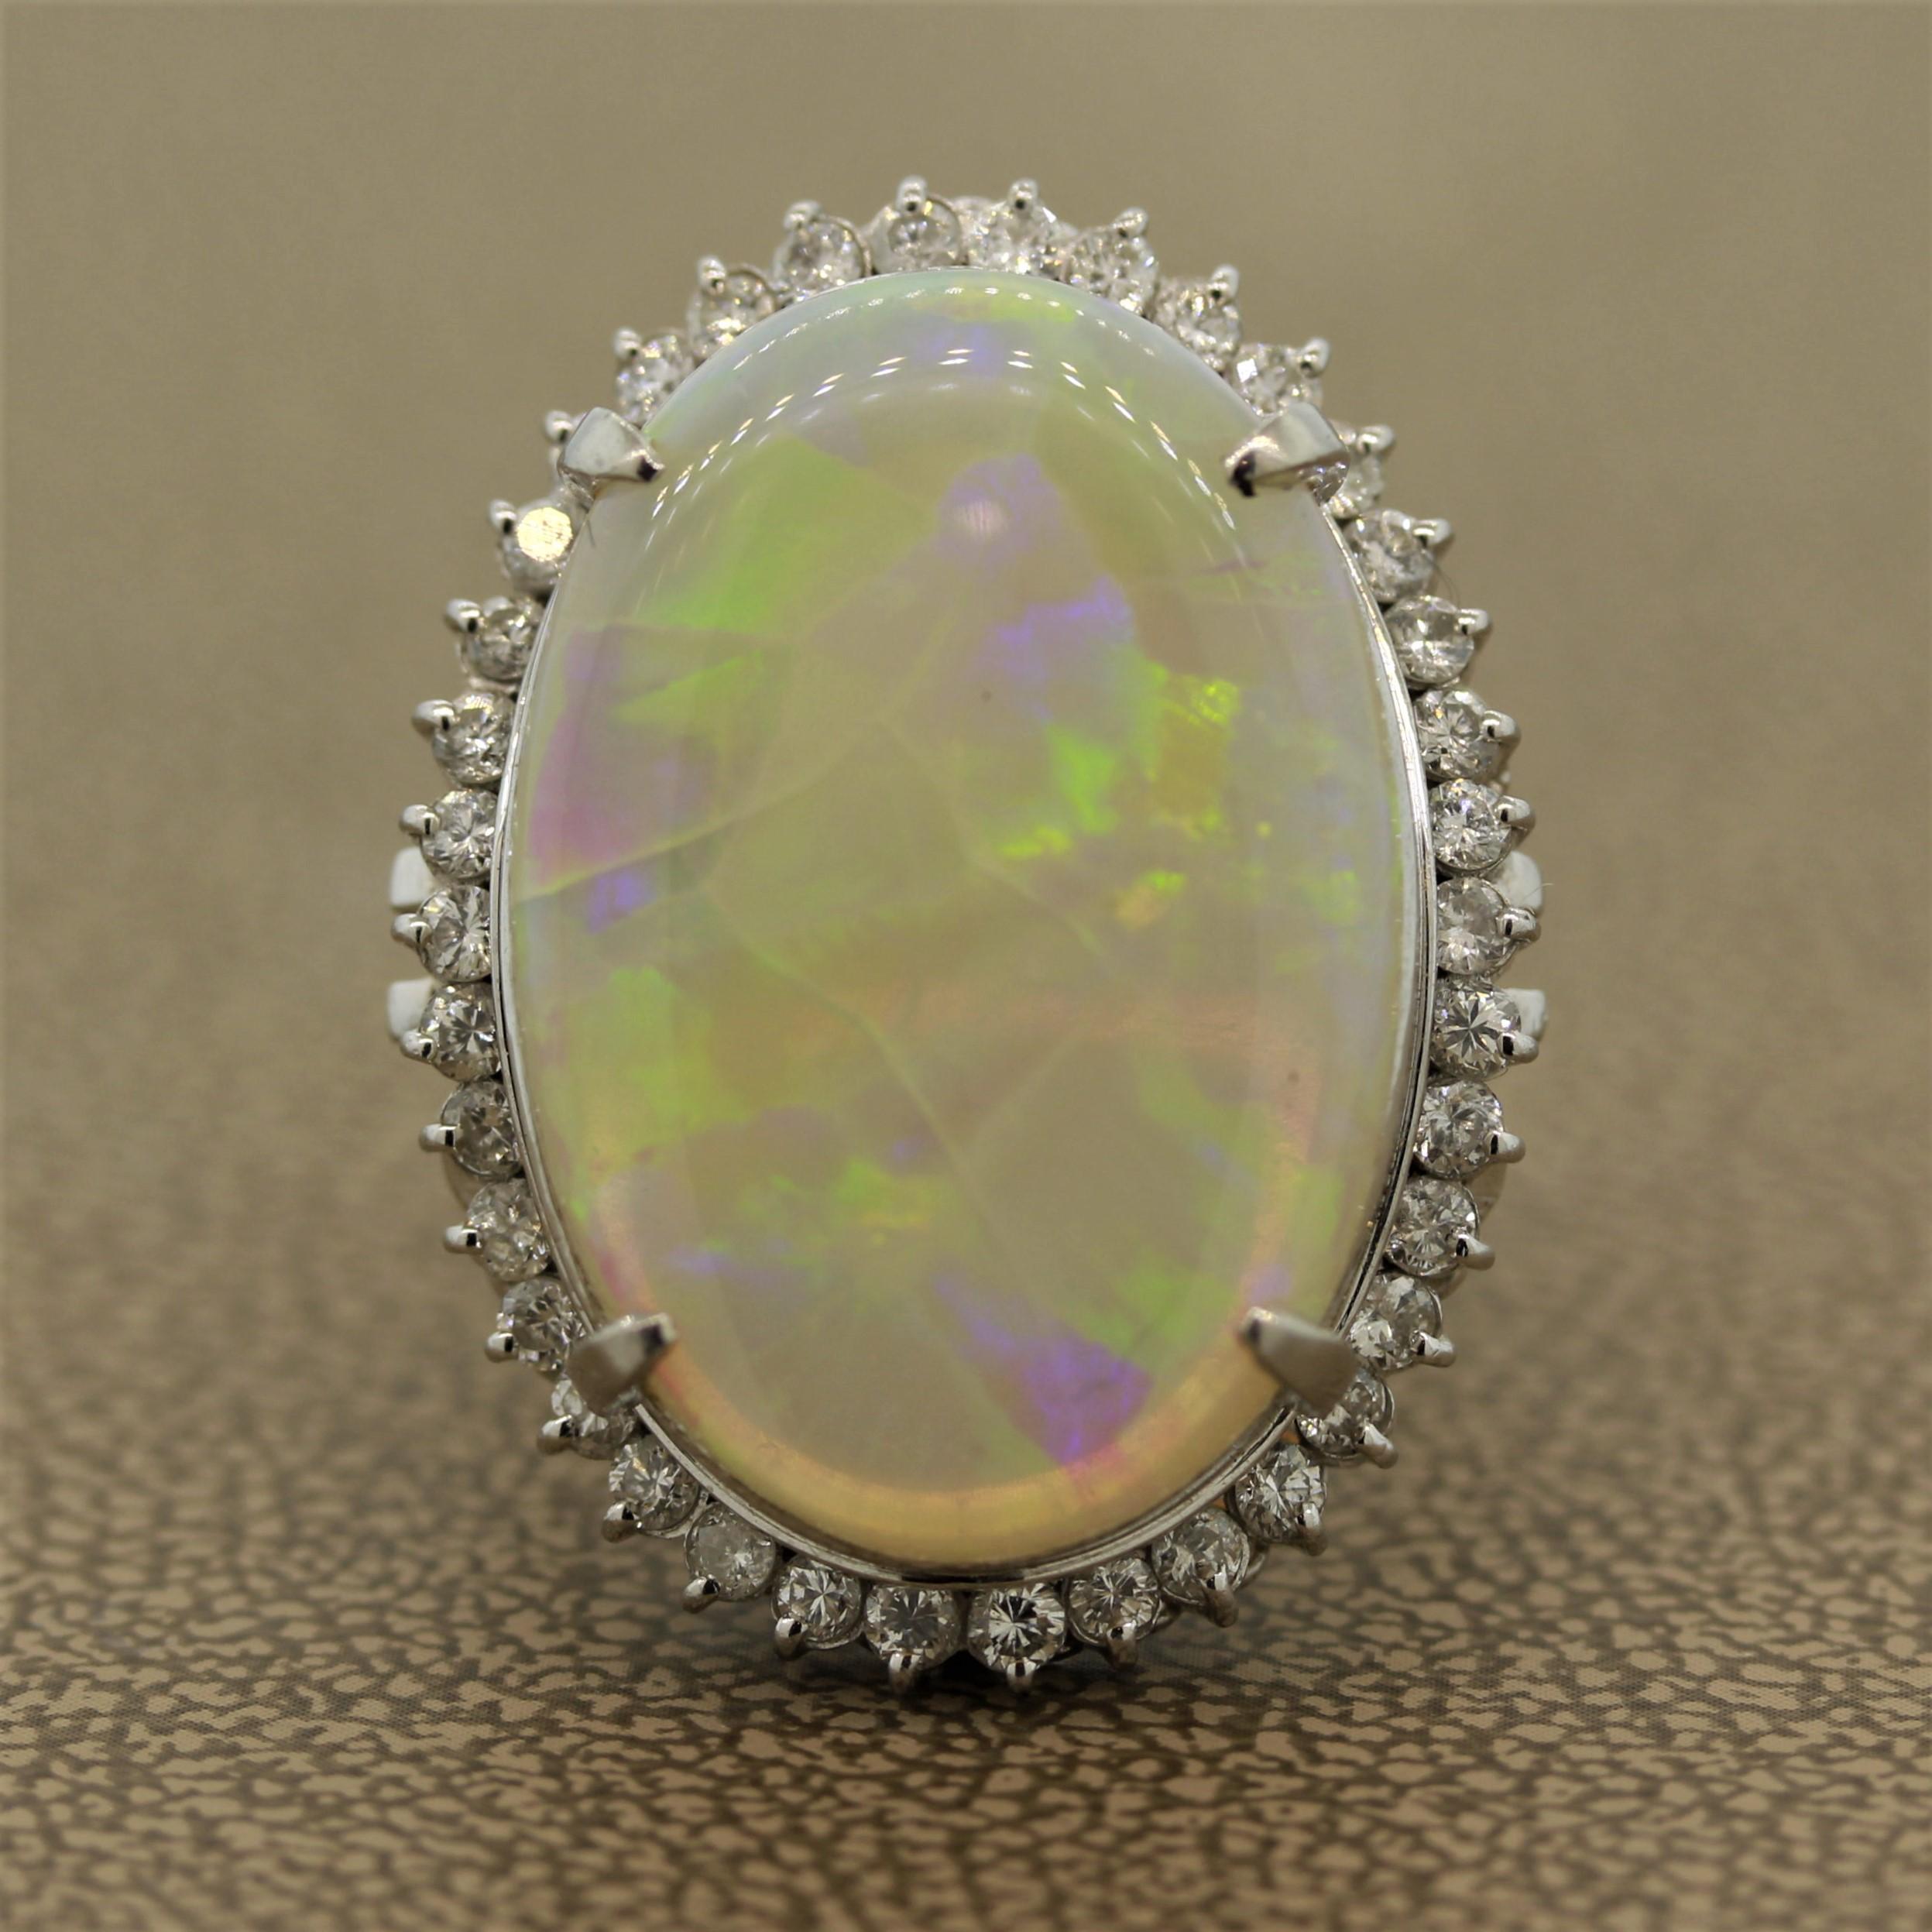 A large white Australian opal takes center stage weighing in at 11.67 carats. It shows bright flashes of green, blue, yellow, and orange. It is accented by 0.88 carats of round brilliant cut diamonds set around the opal making a halo. Hand